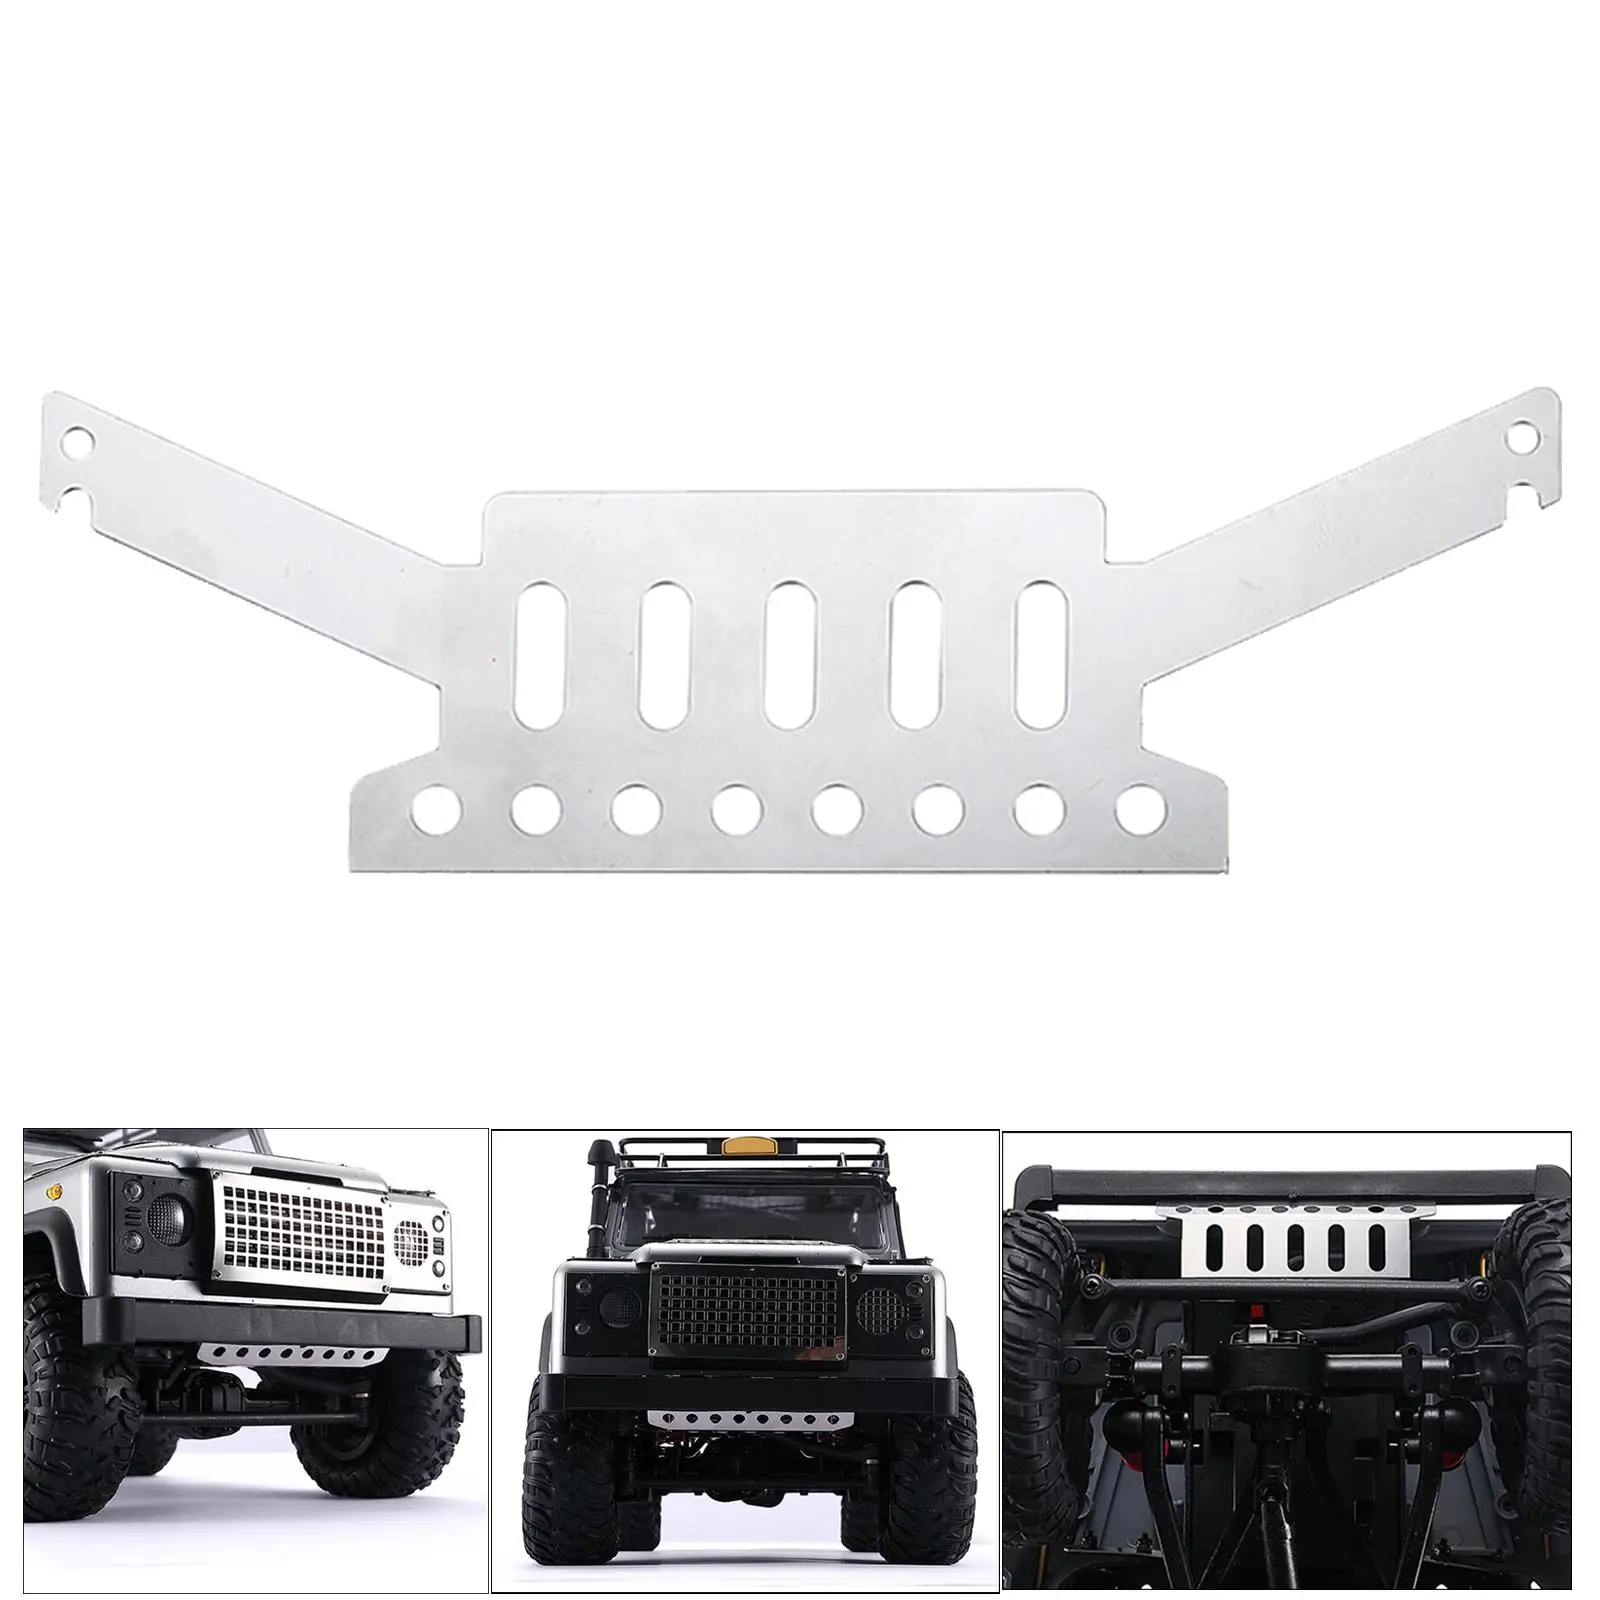 Front Chassis Armor Guard Bottom Protection Plate for MN D90 1:12 RC Car